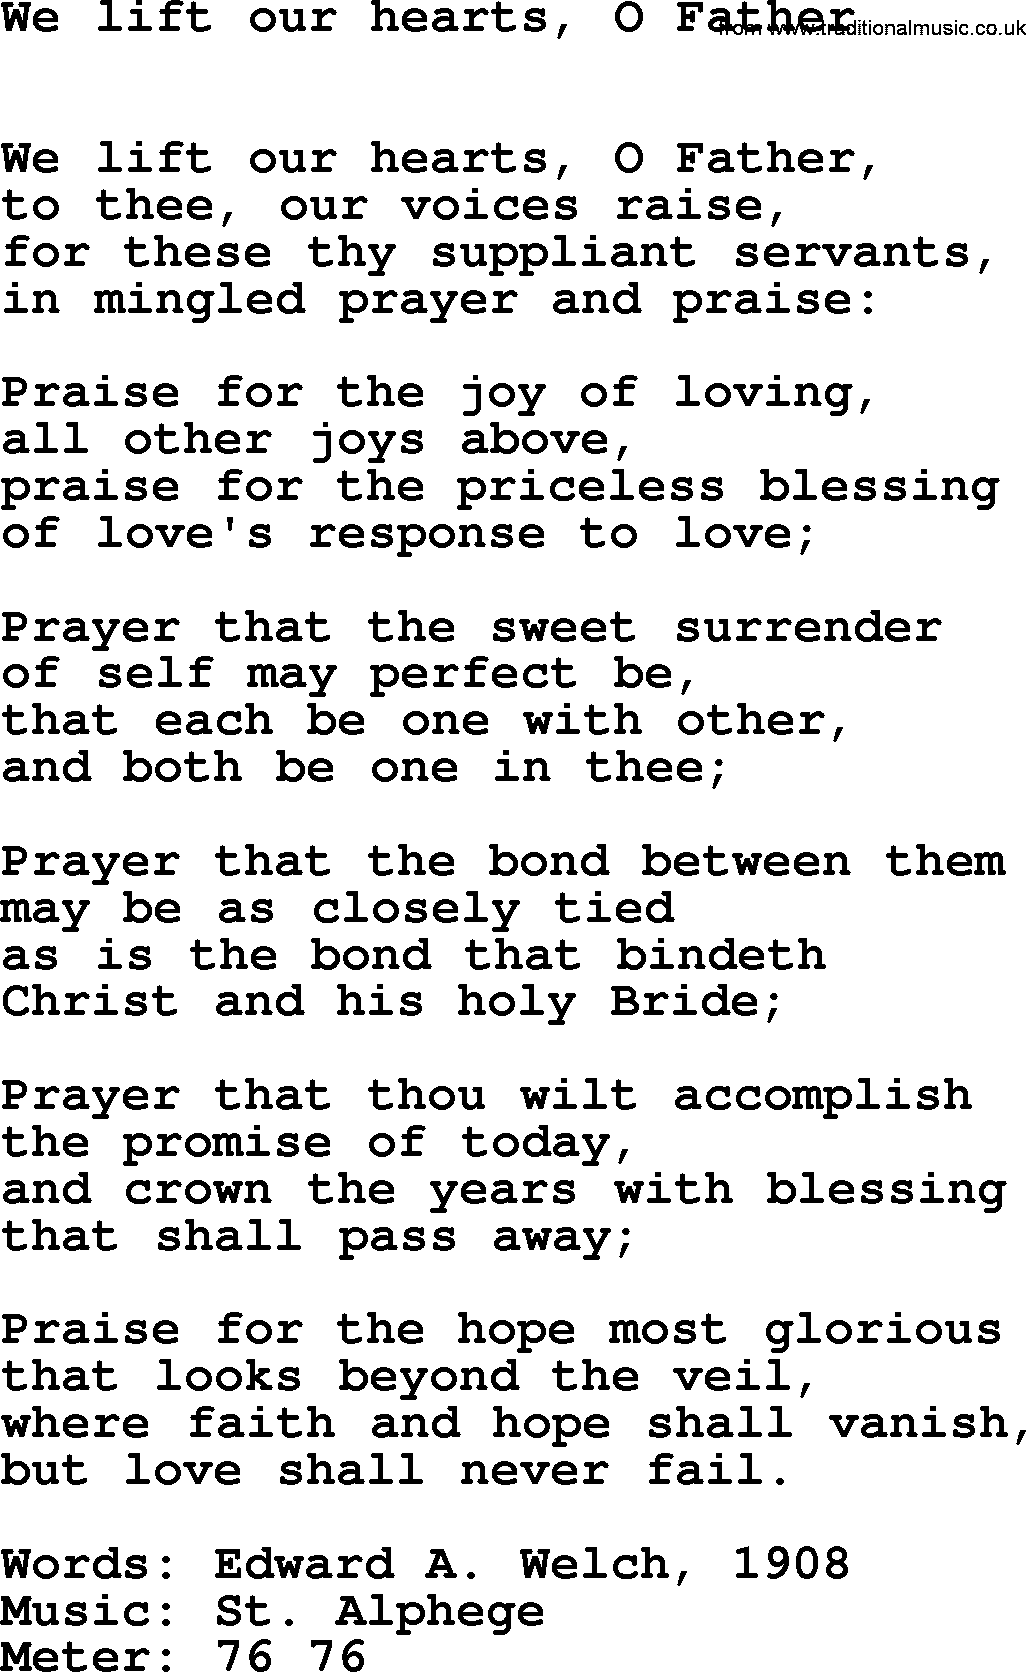 Book of Common Praise Hymn: We Lift Our Hearts, O Father.txt lyrics with midi music